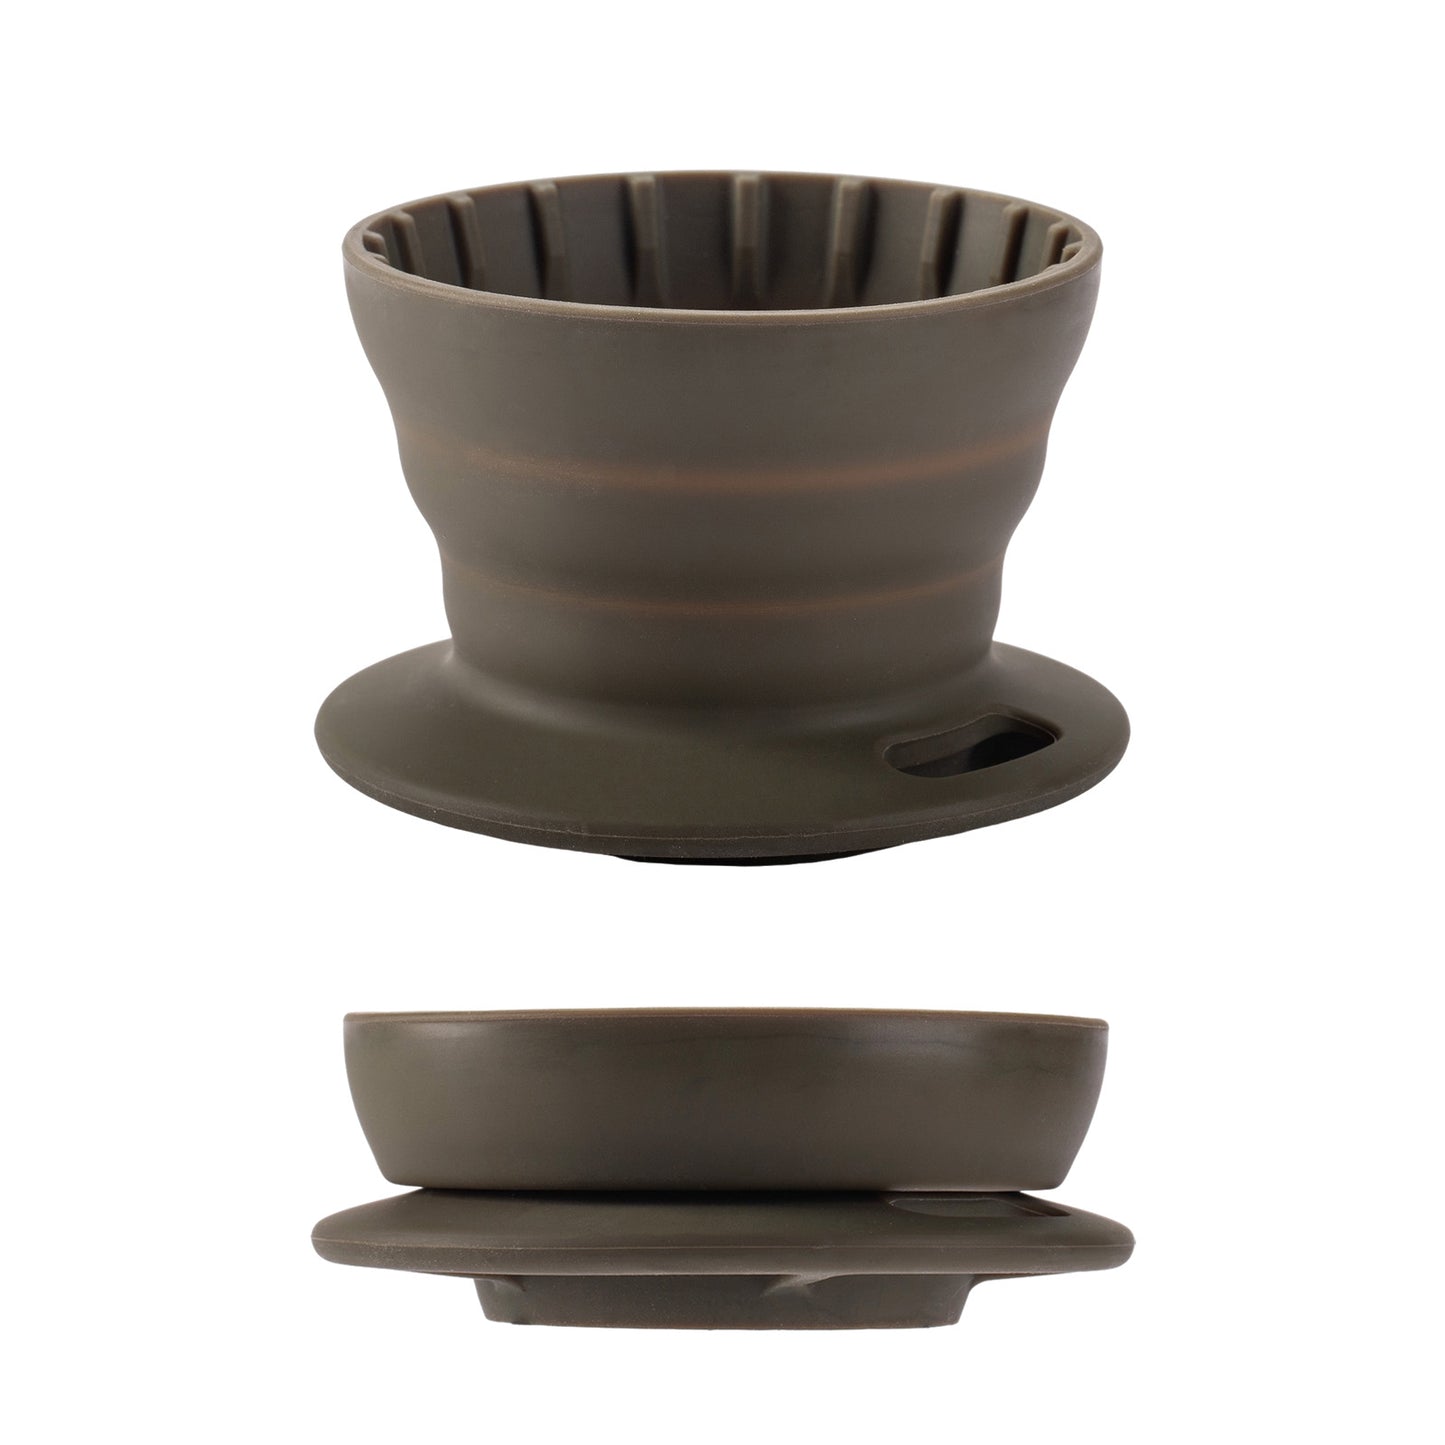 Vandroop Collapsible Coffee Dripper(1-2 Cup)